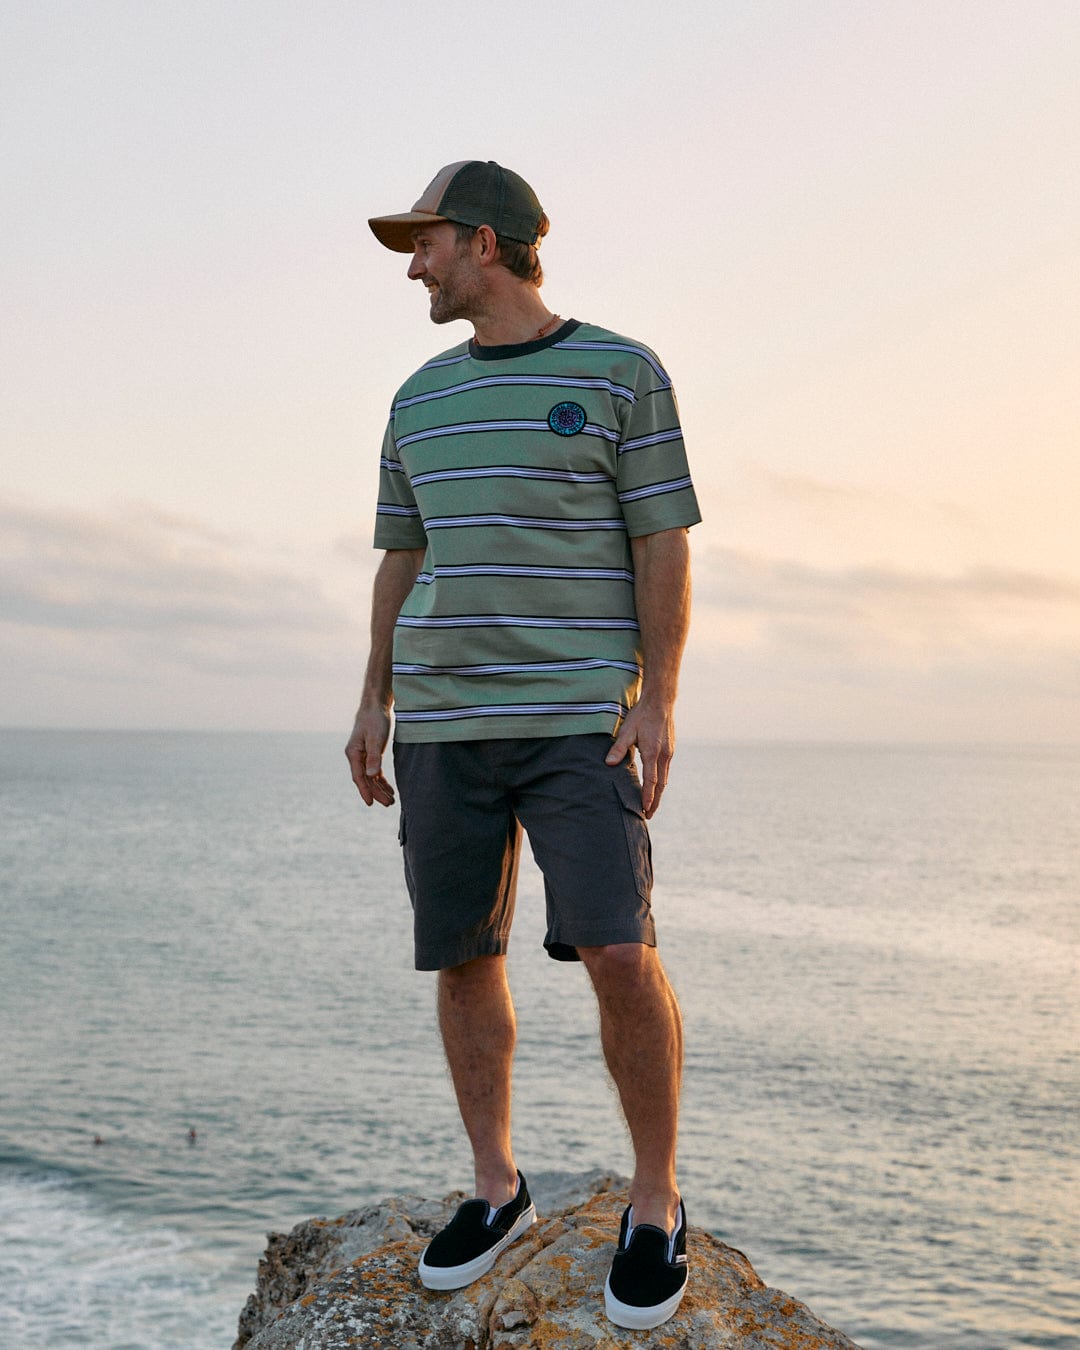 Man standing on a rocky outcrop overlooking the sea at sunset, wearing an Saltrock SR Original - Mens Short Sleeve T-Shirt in Green with a retro surf badge.